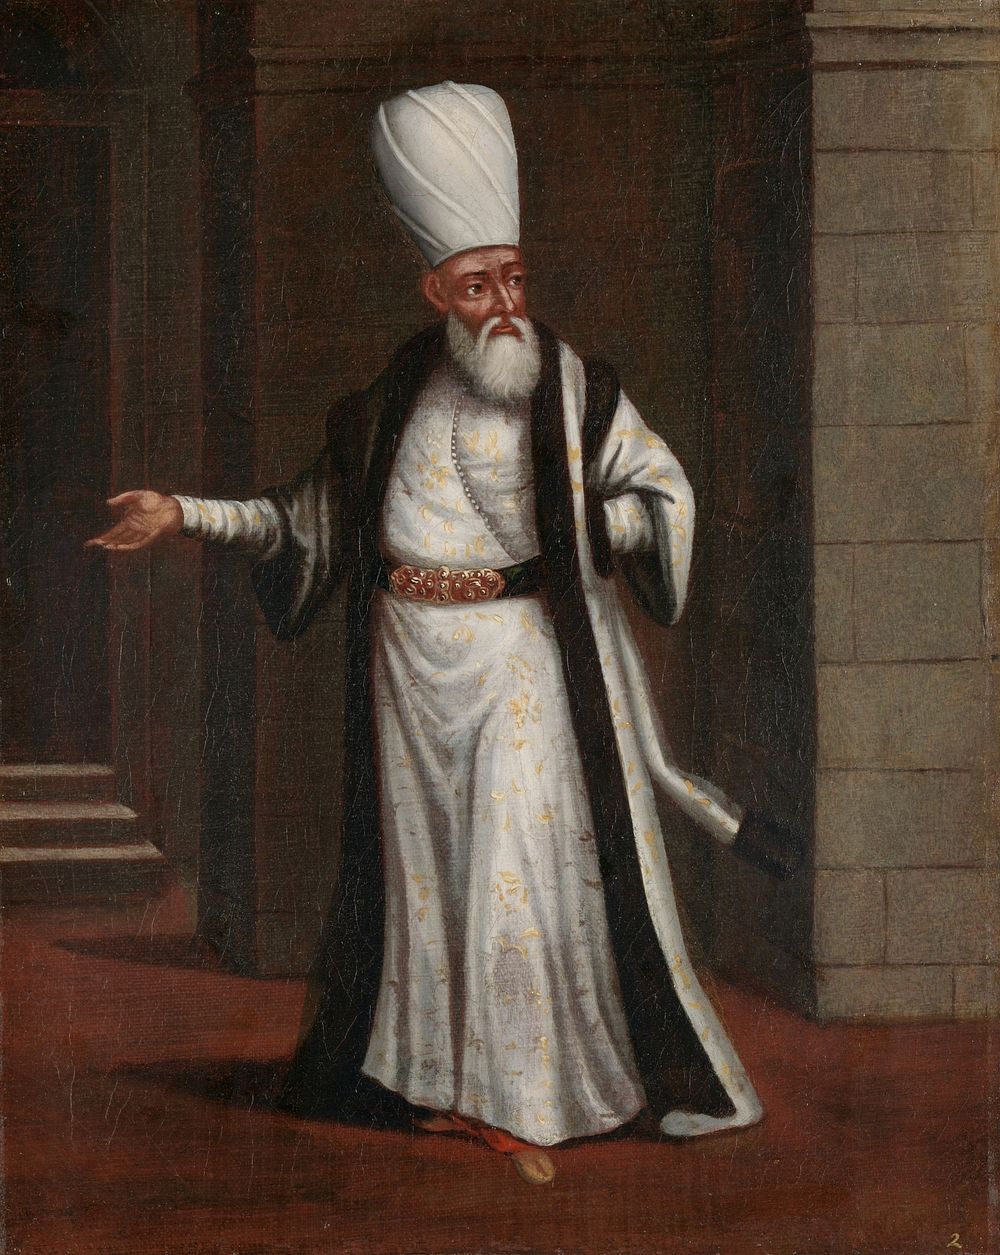 The Janissary Aga, Commander-in-Chief of the Janissaries (1700 - 1737) by Jean Baptiste Vanmour